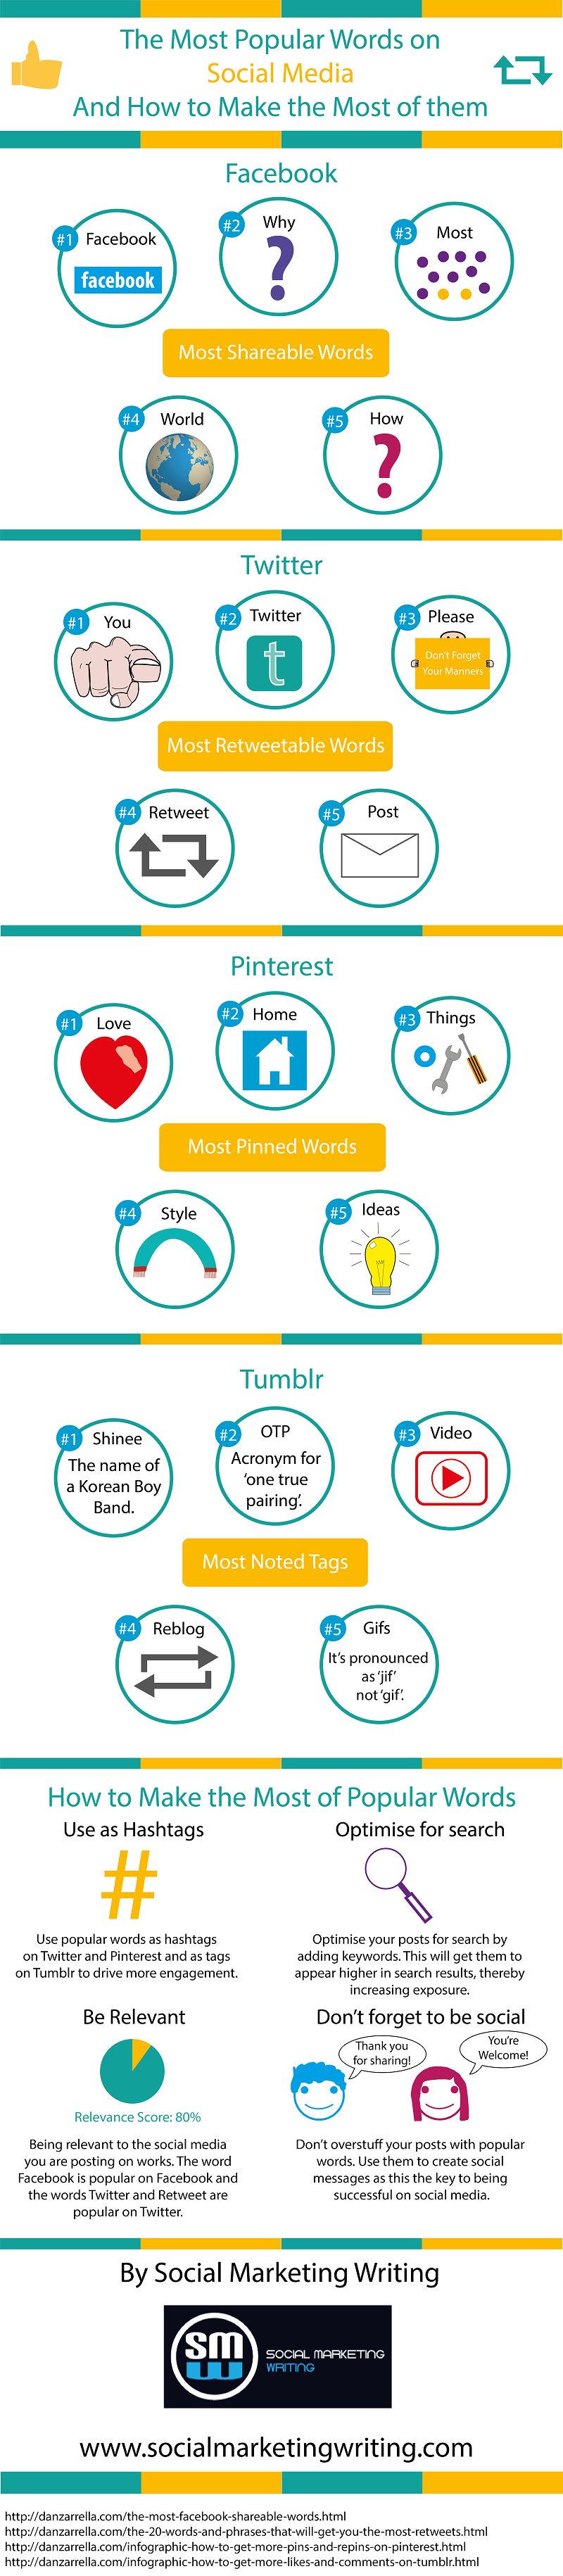 The Most Popular Words on Social Media And How to Make the Most of Them [Infographic]